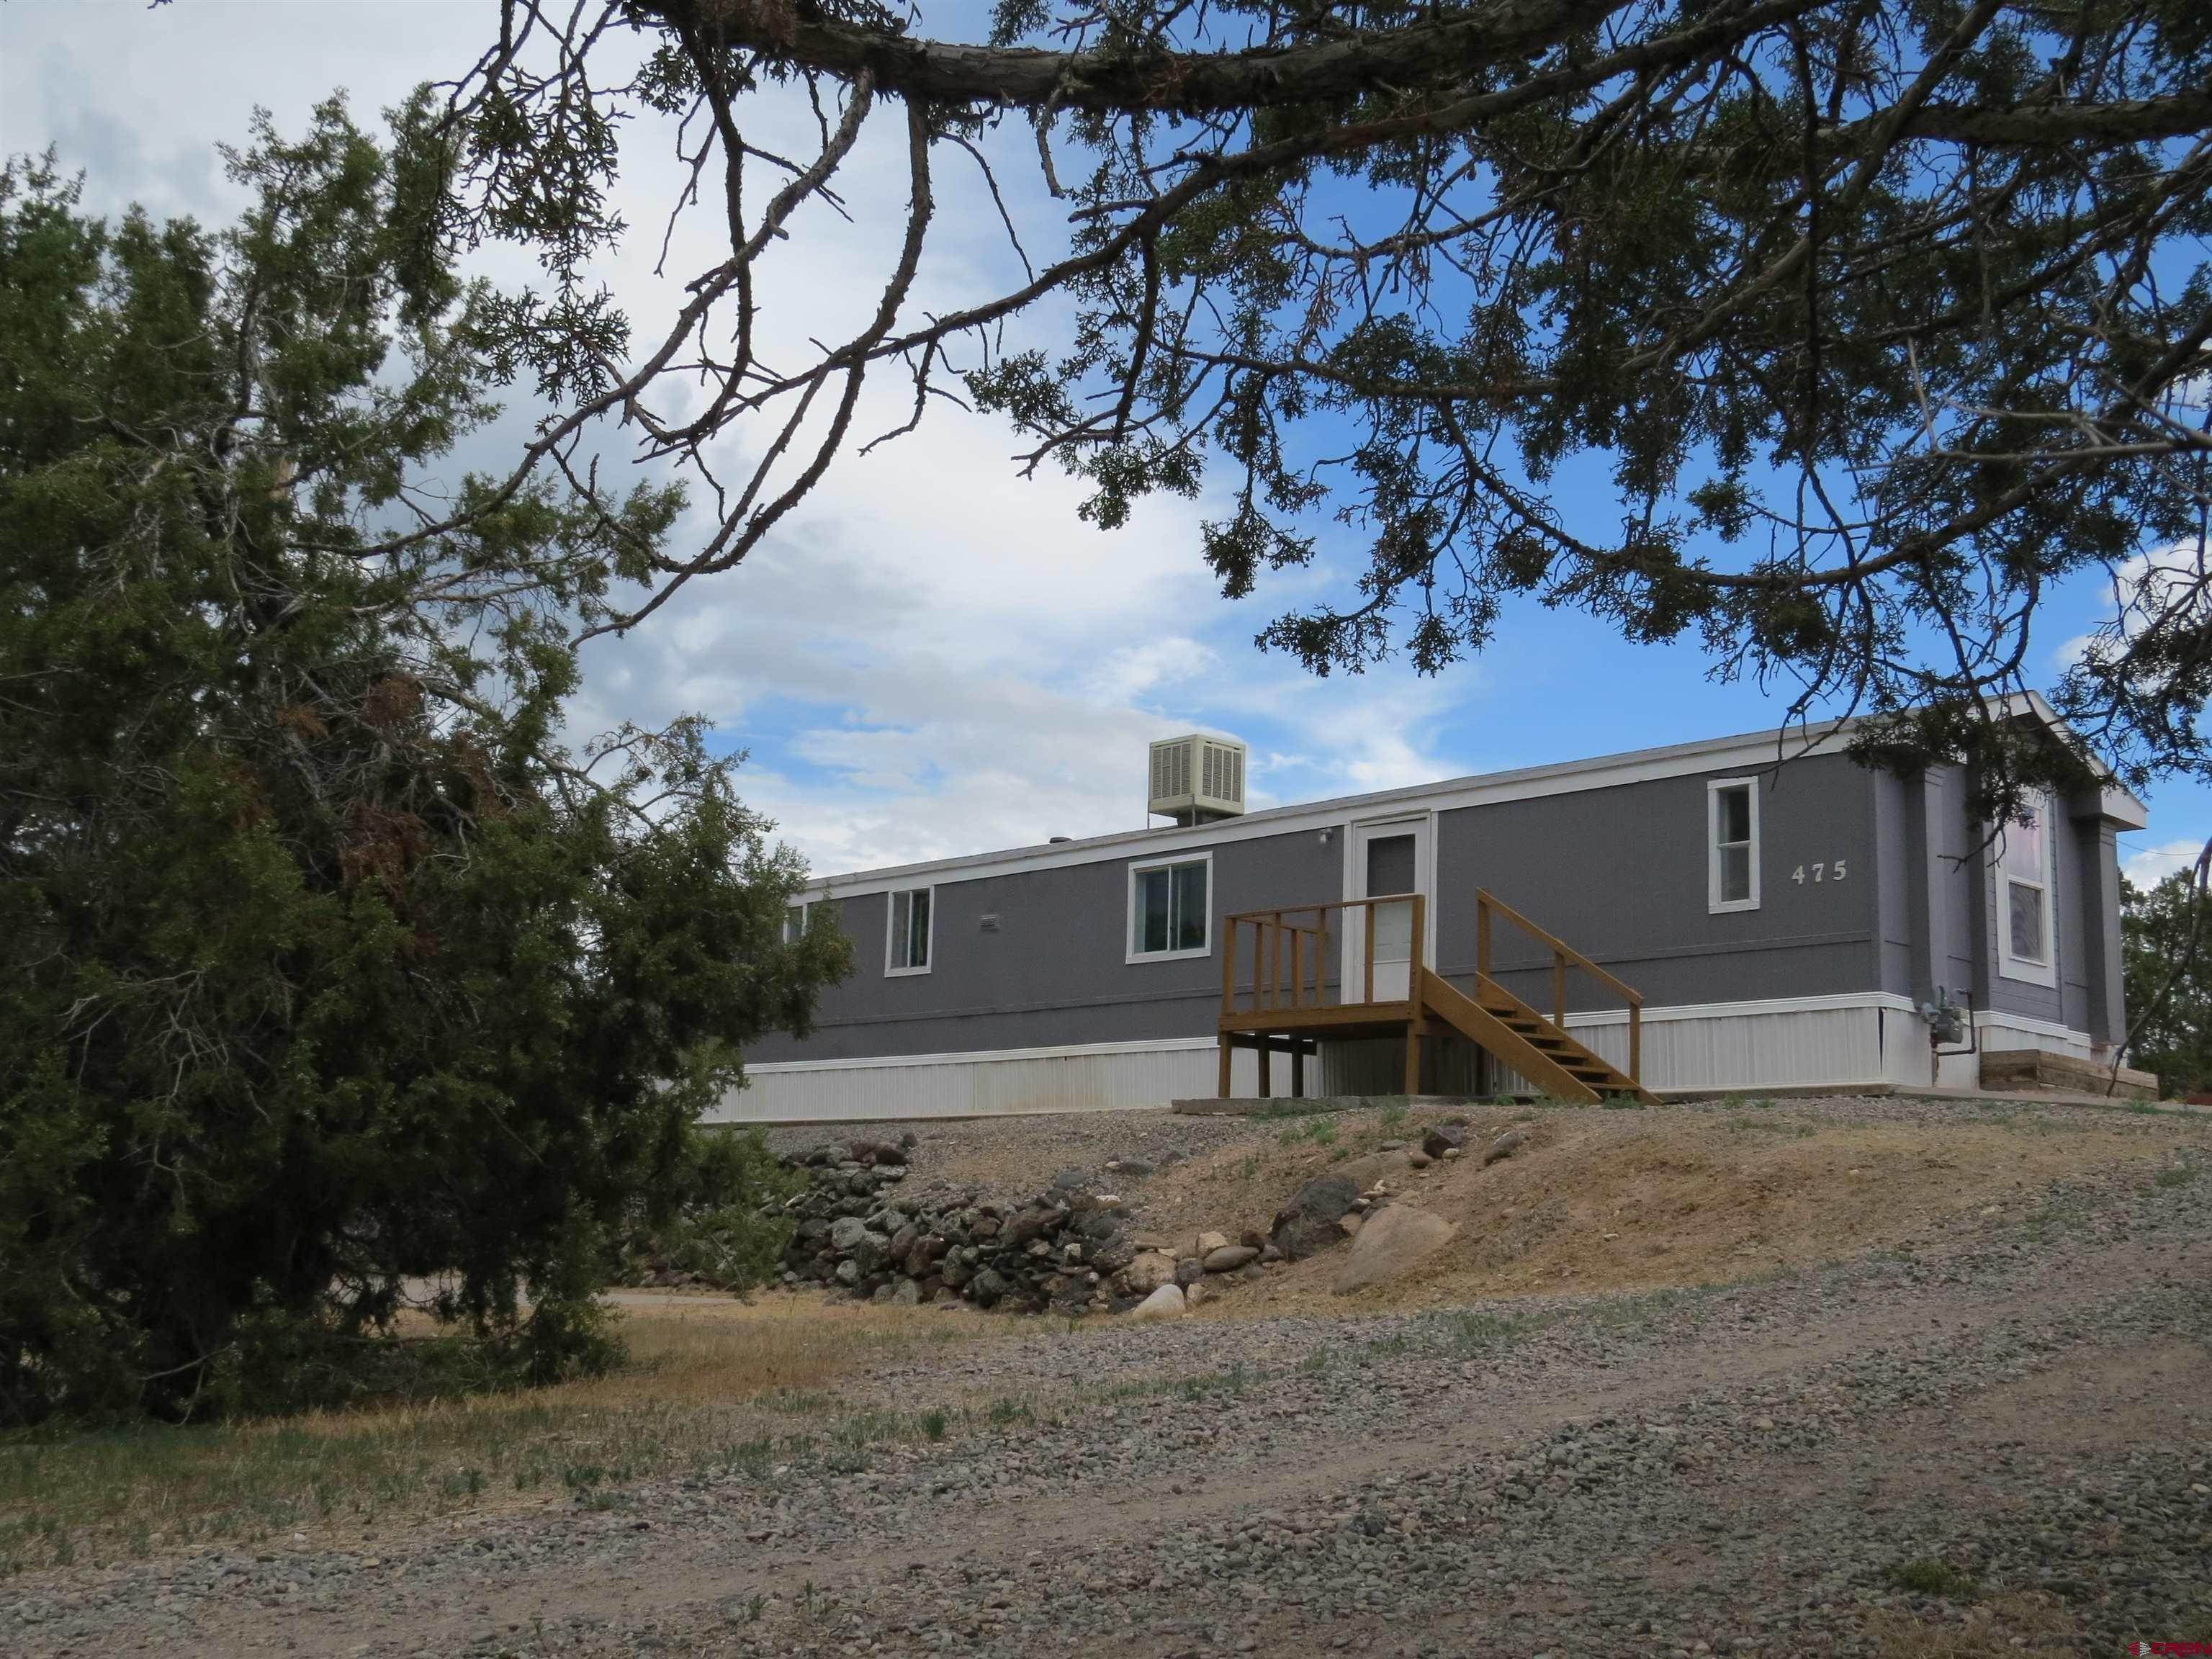 Manufactured / Mobile Housing for Sale at 475 NW 9th Street Cedaredge, Colorado 81413 United States